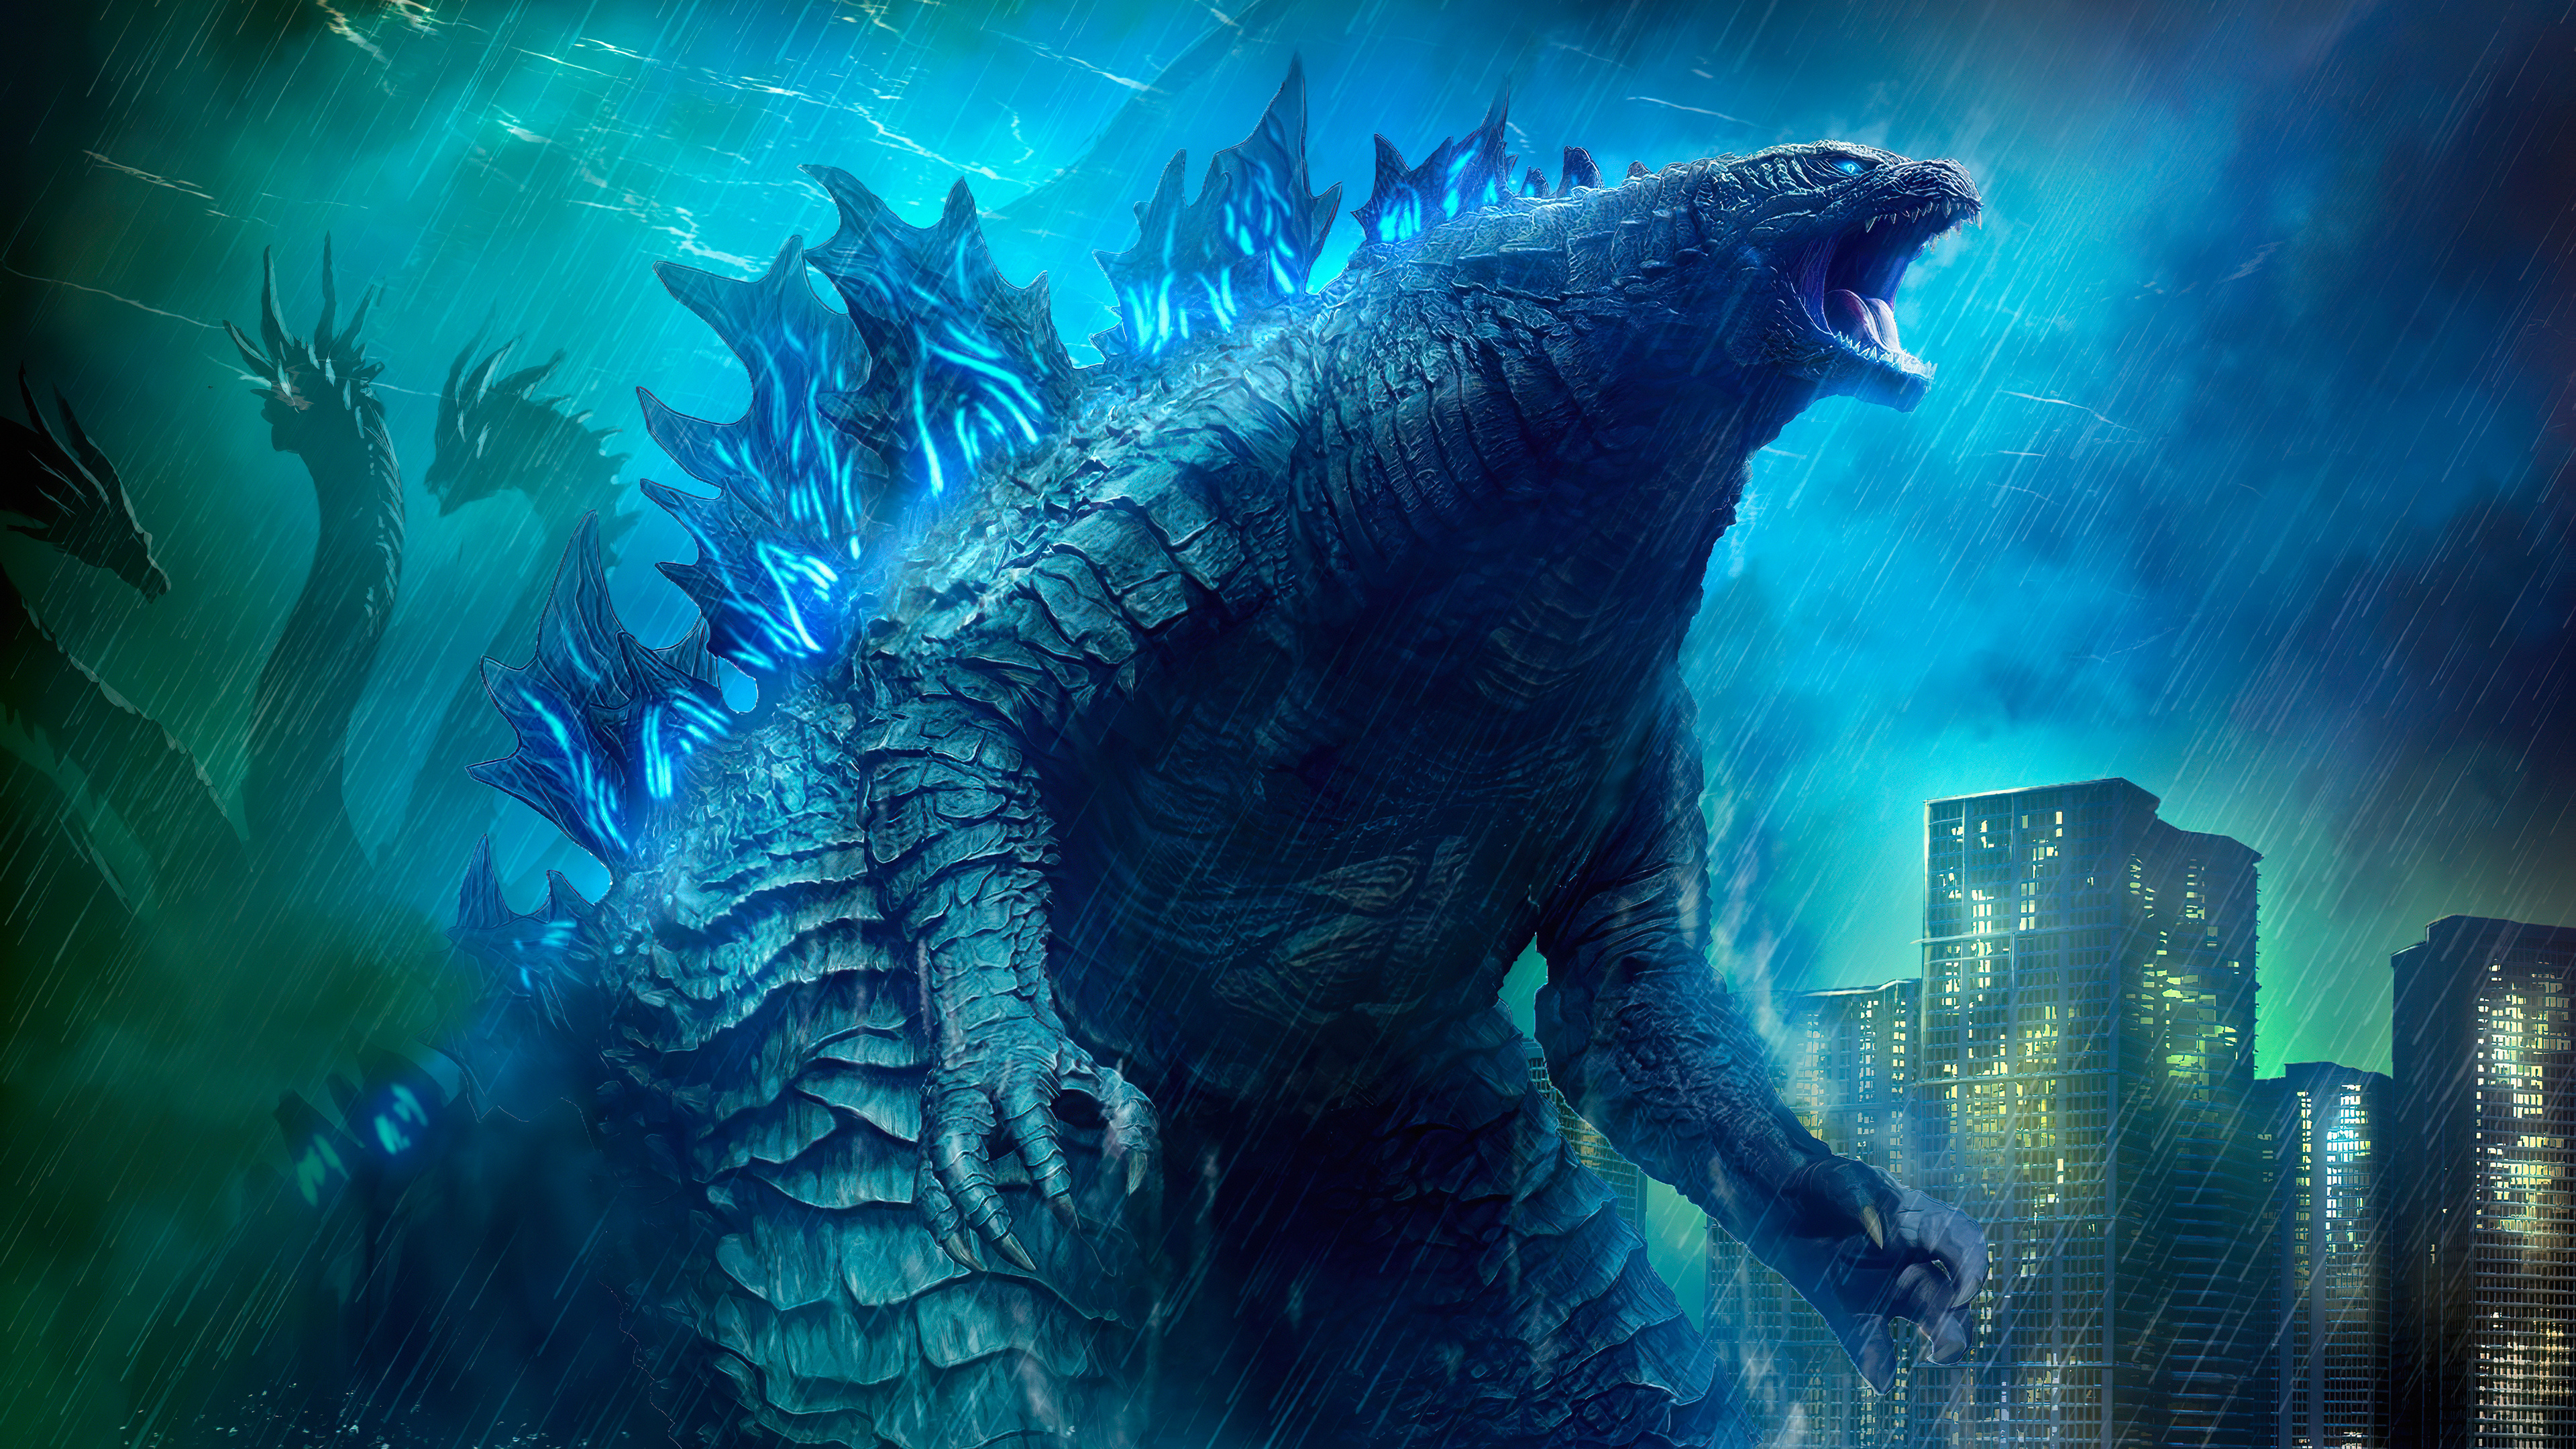 Godzilla: King of the Monsters, Directed and co-written by Michael Dougherty. 3840x2160 4K Wallpaper.